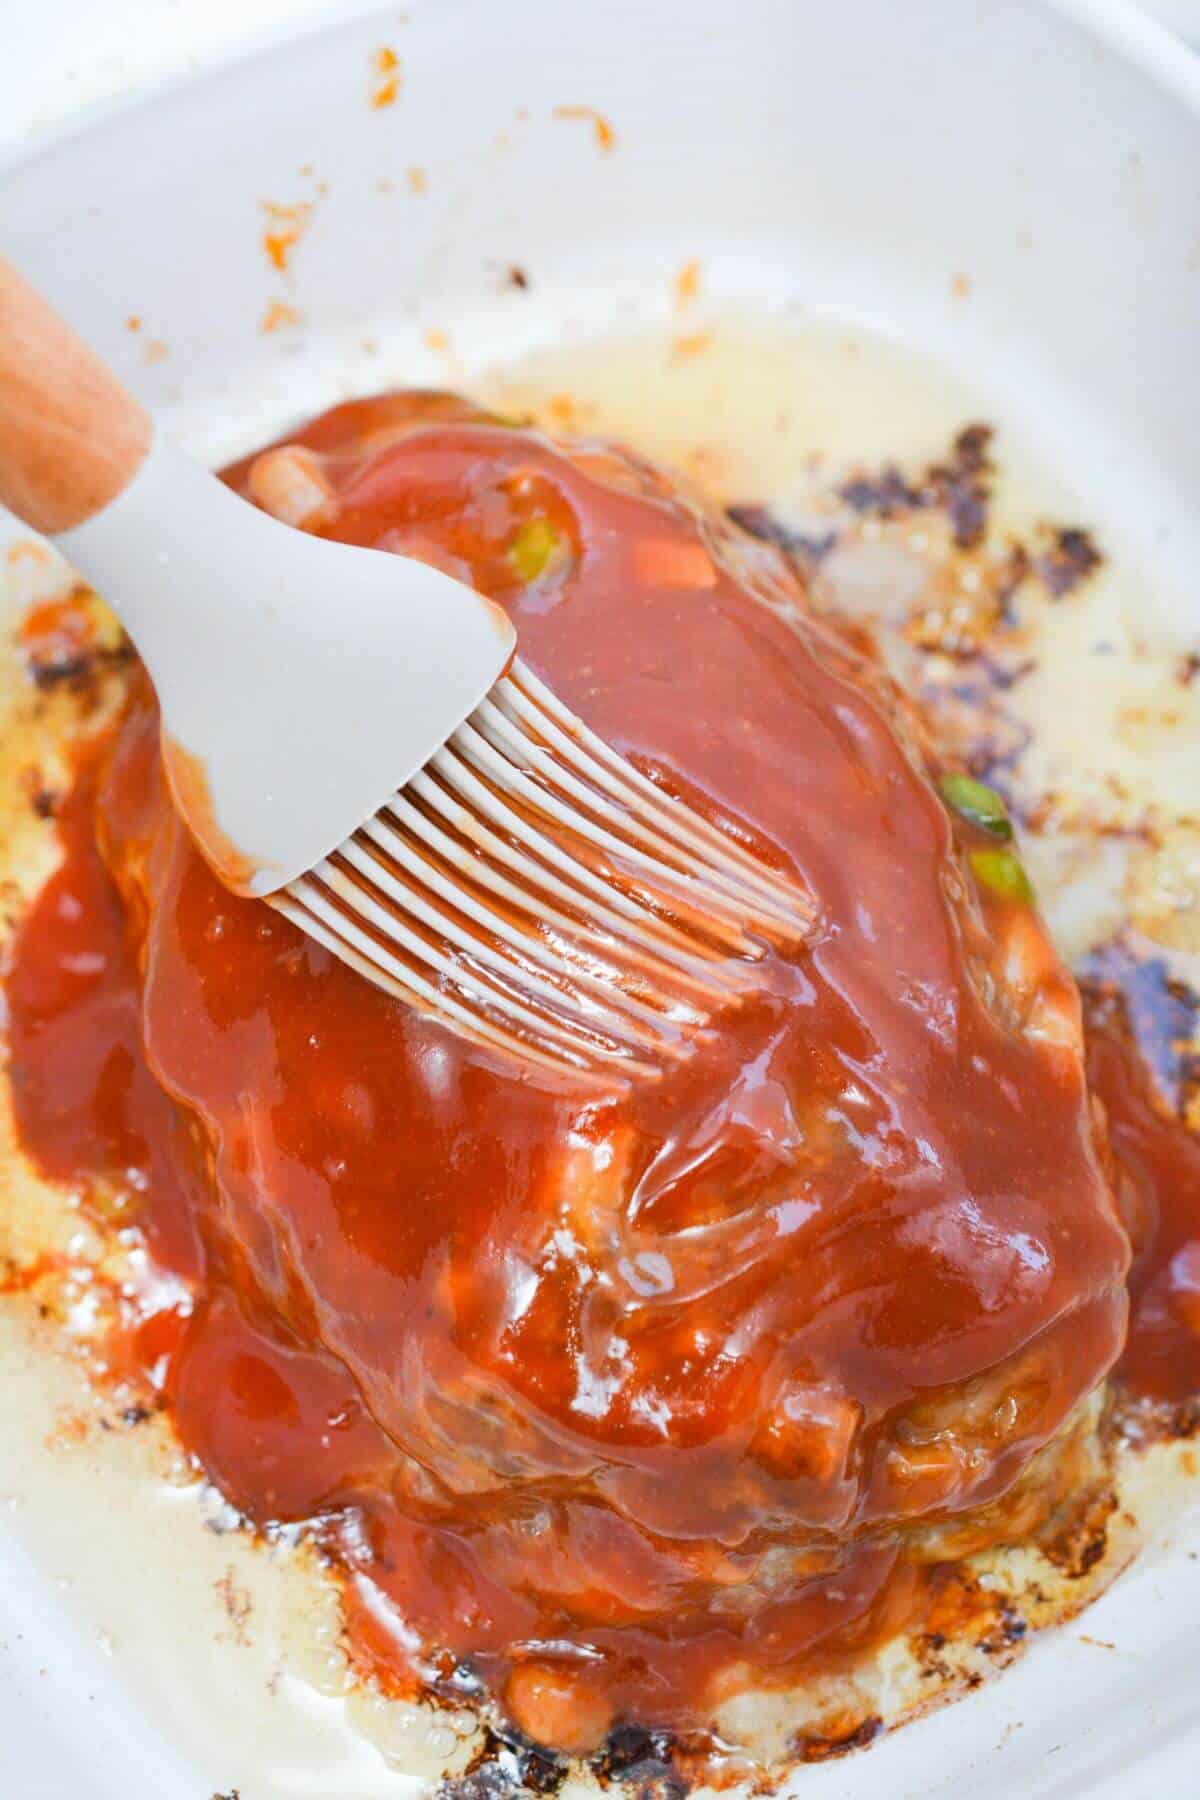 A brush is being used to brush sauce onto meatloaf.